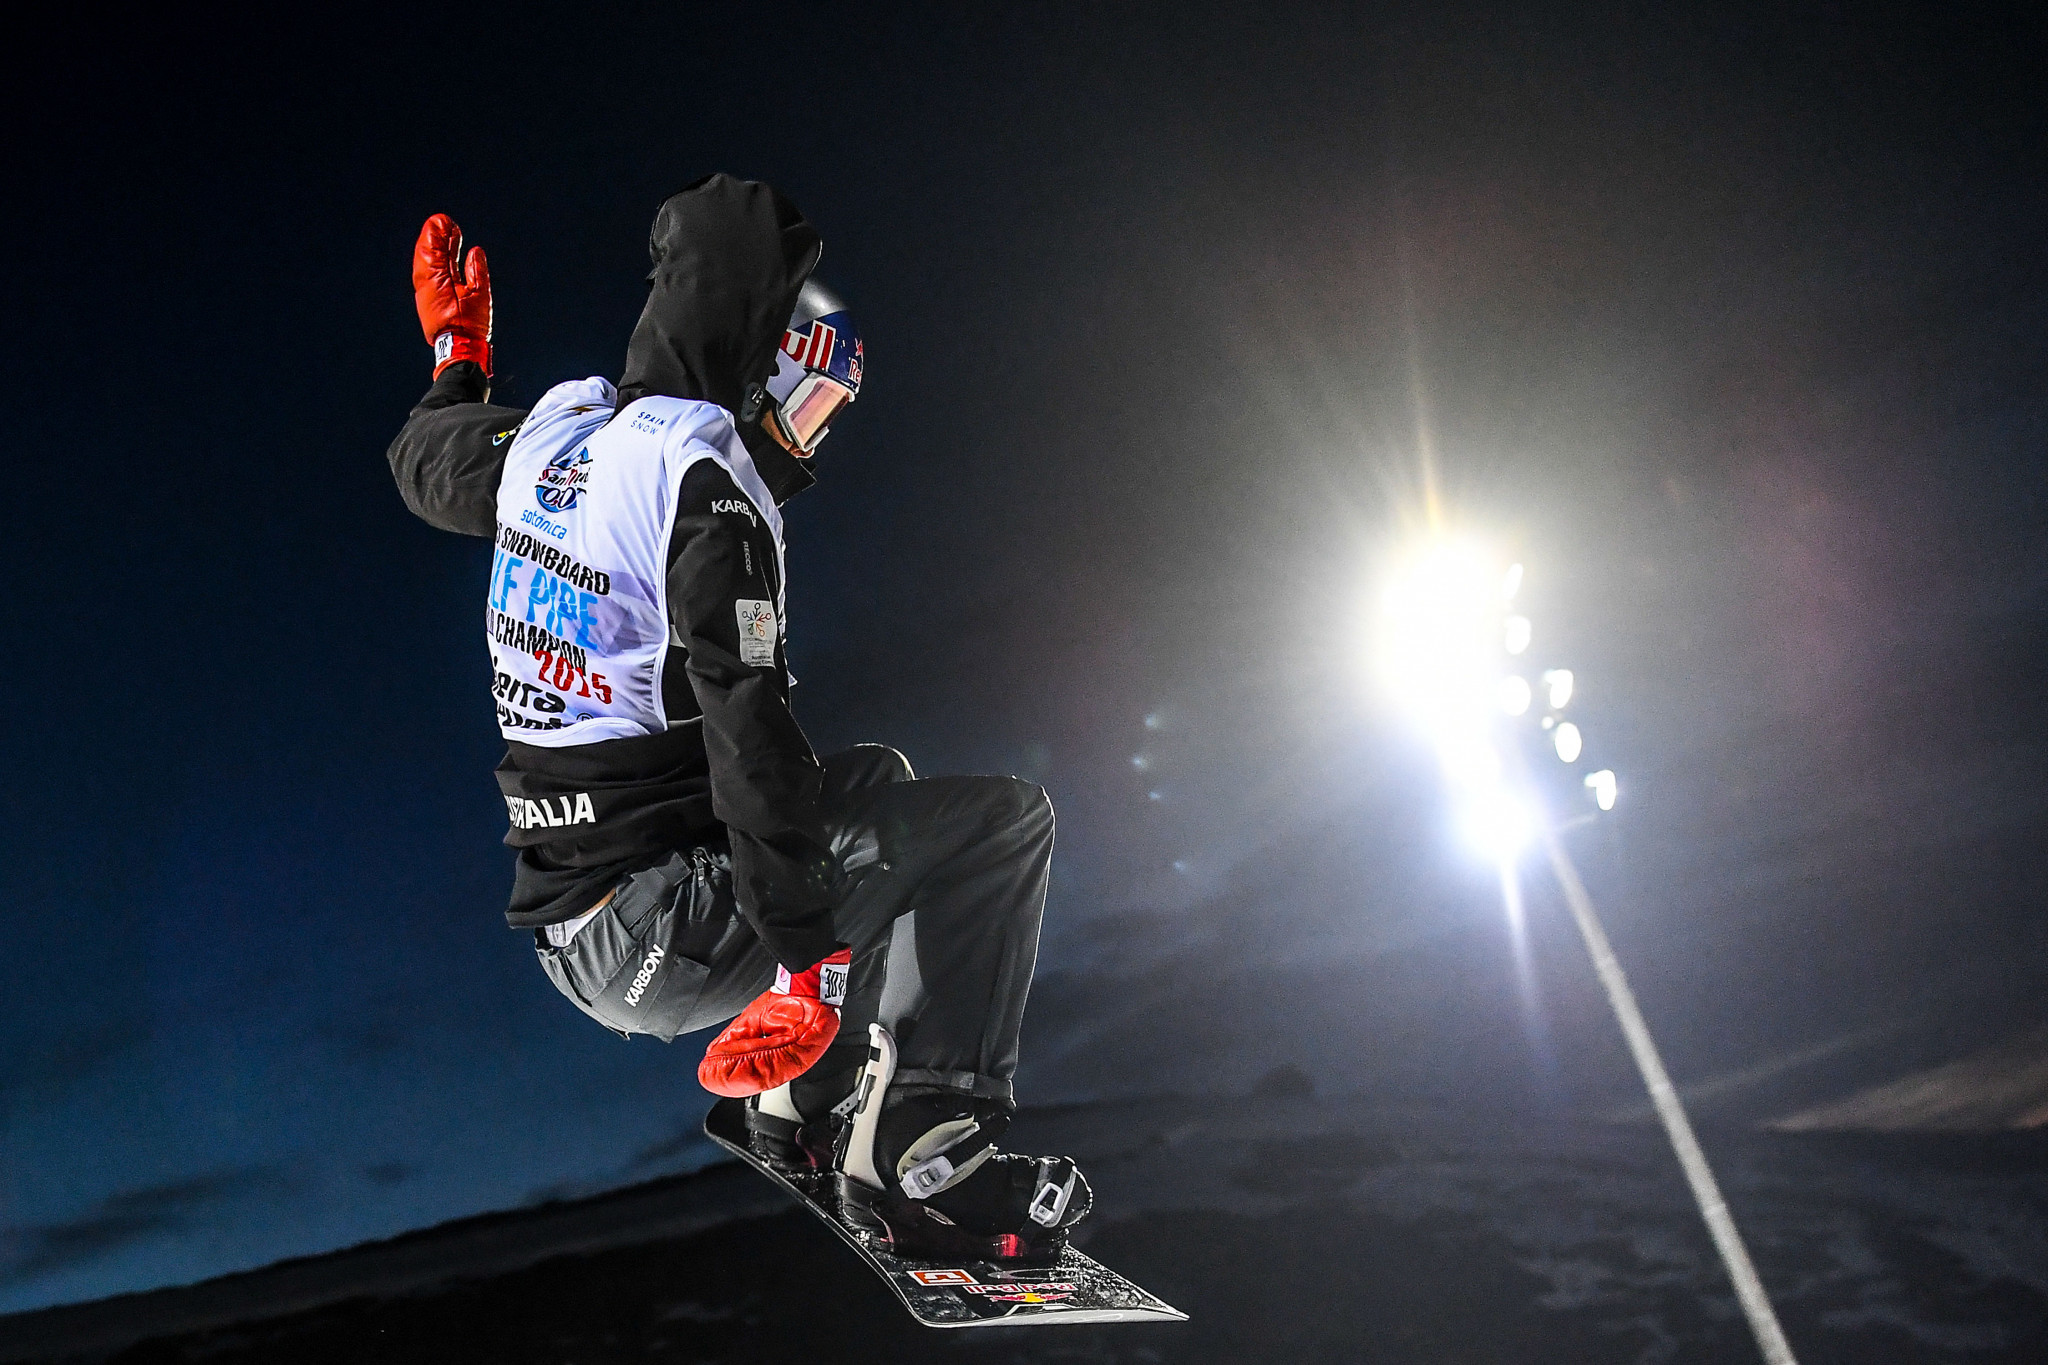 Scotty James is the reigning world halfpipe champion ©Getty Images